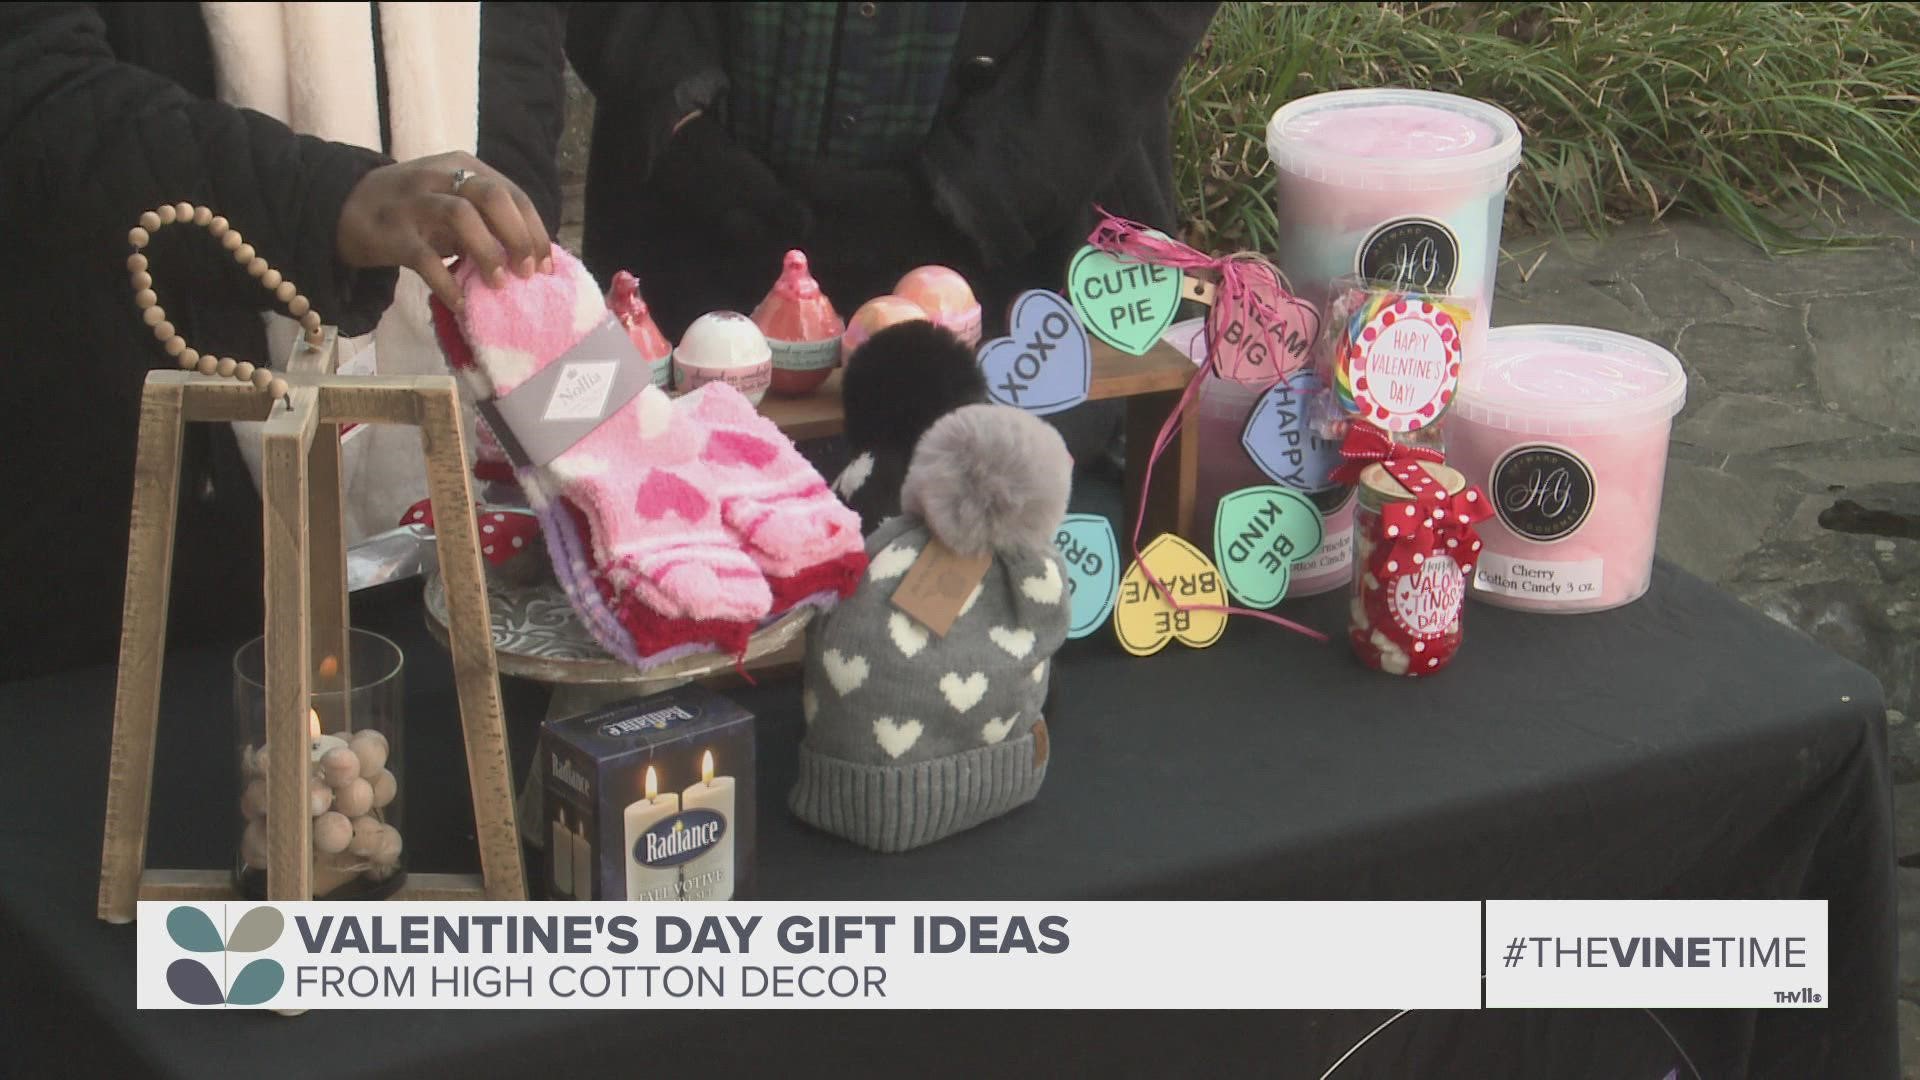 Aaniyah Cox from Cotton Shed is here and we are talking about Valentine's Day gift ideas.